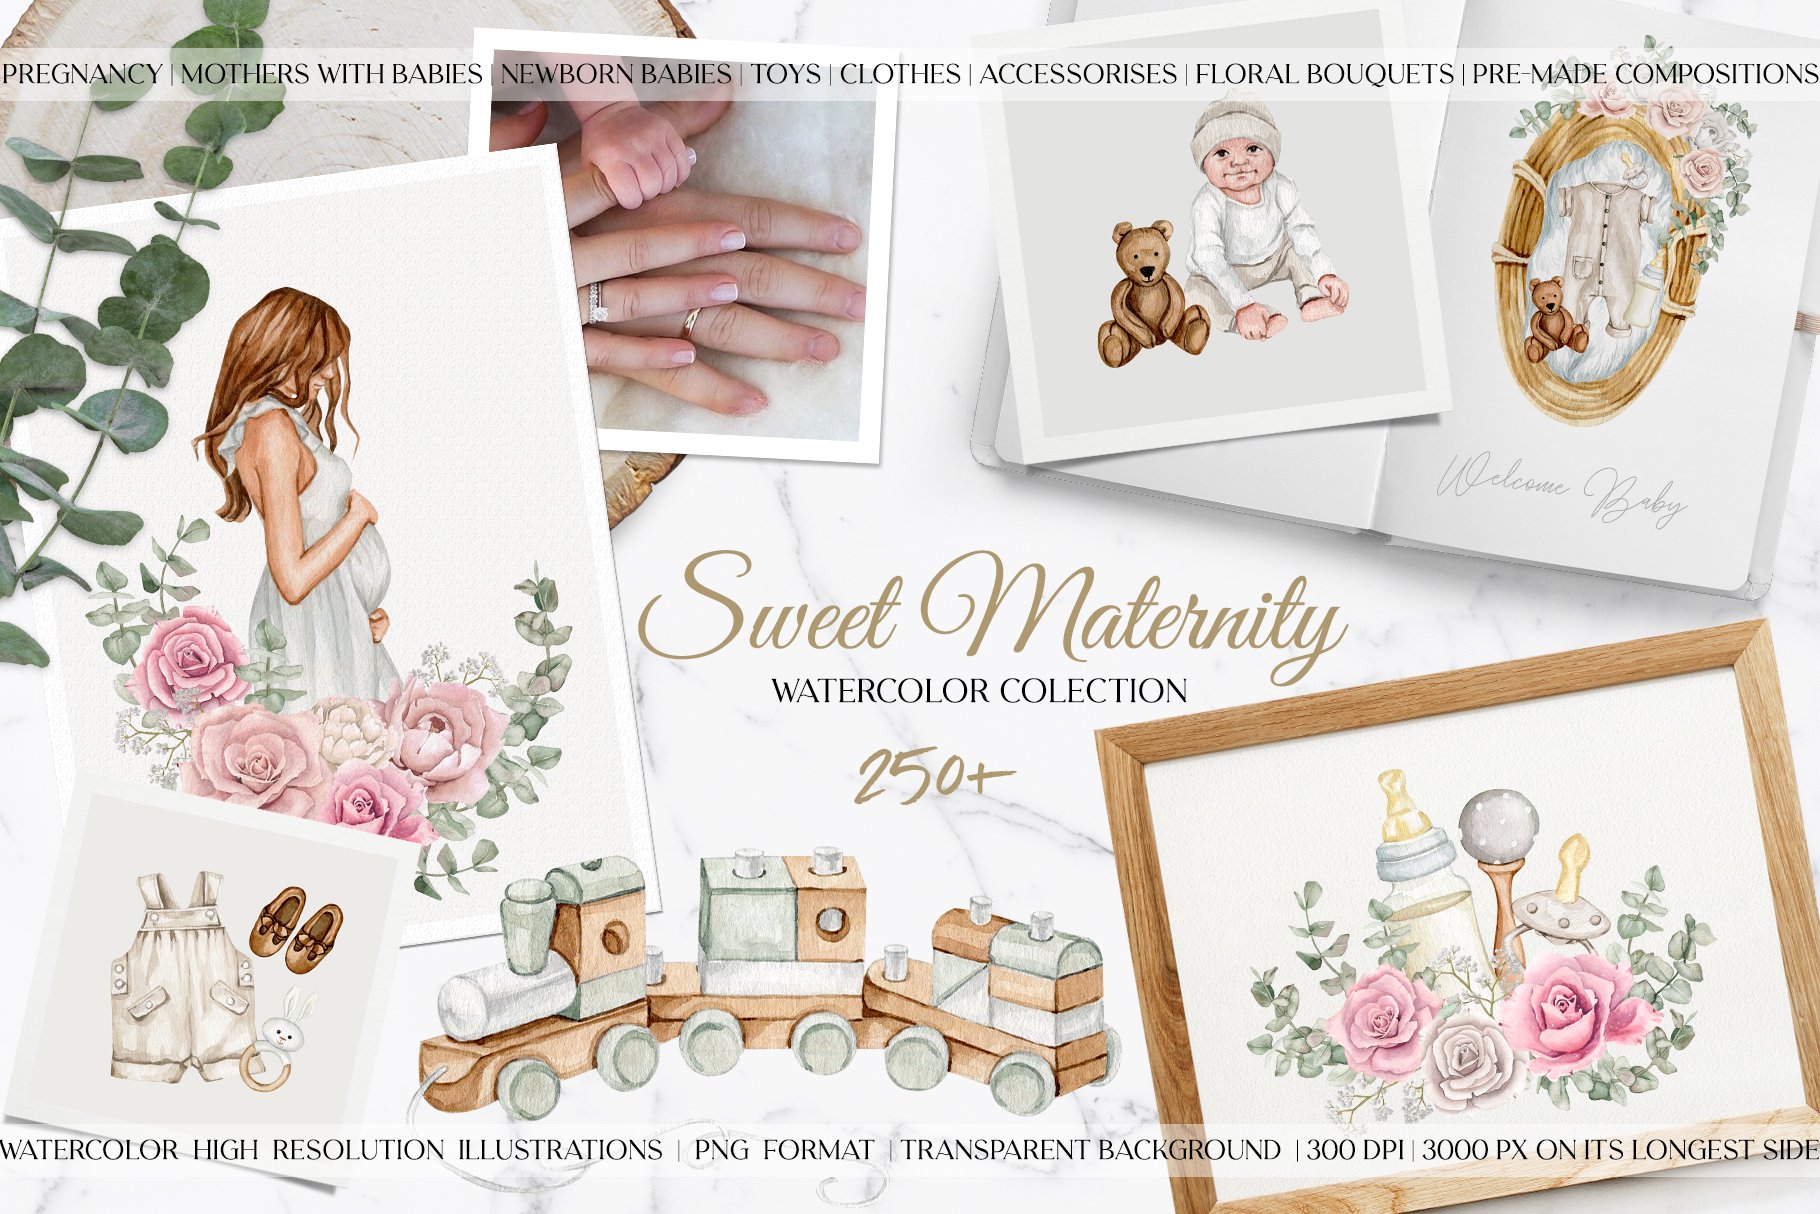 Sweet Maternity Watercolor Set cover image.